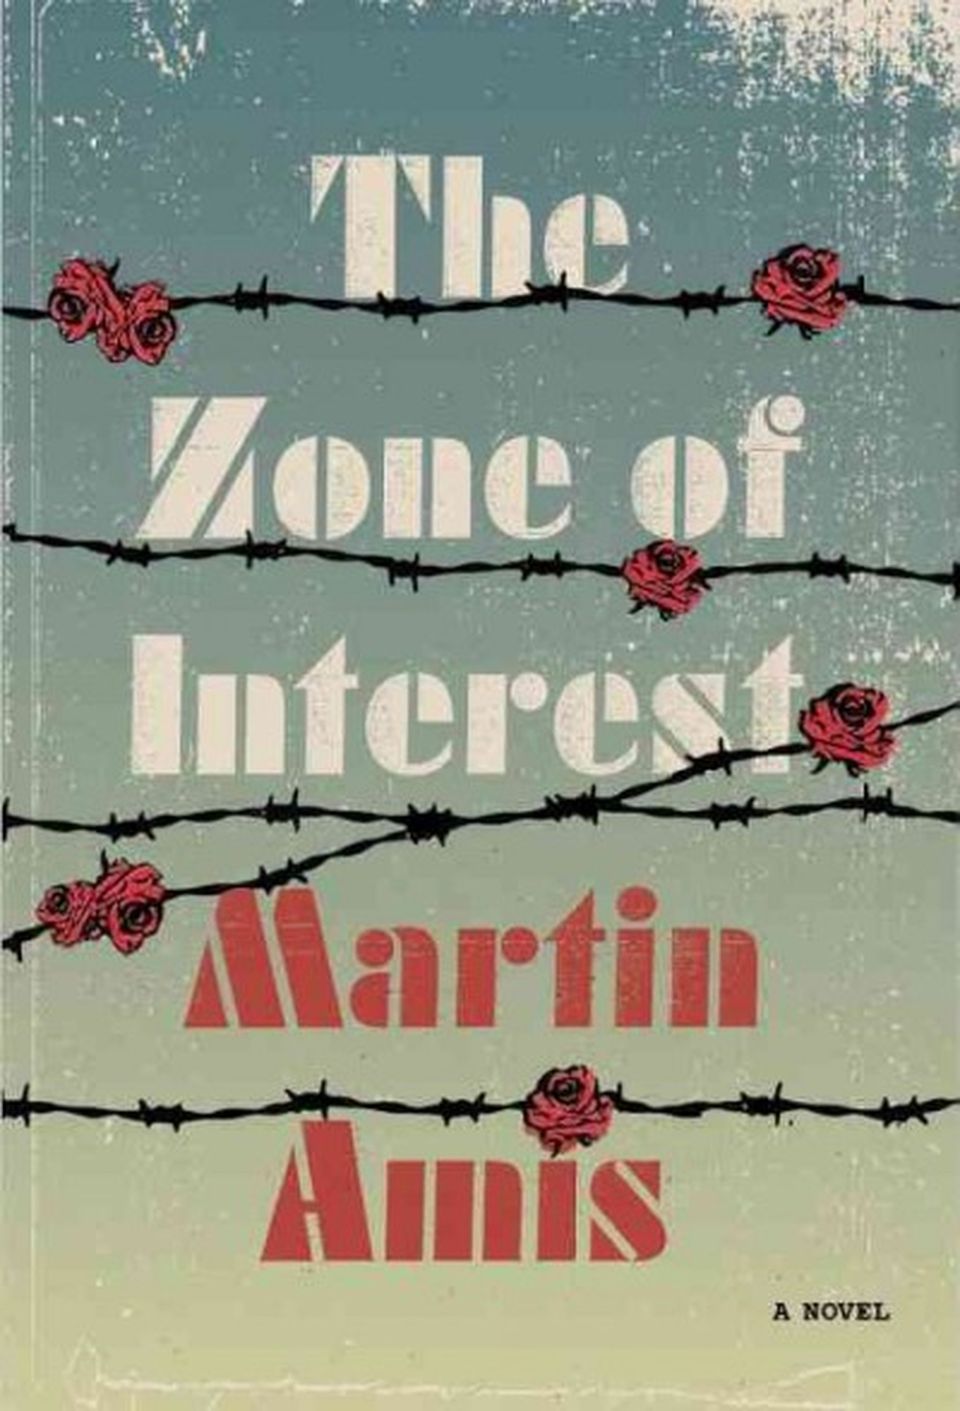 'The Zone of Interest' by Martin Amis (Knopf)